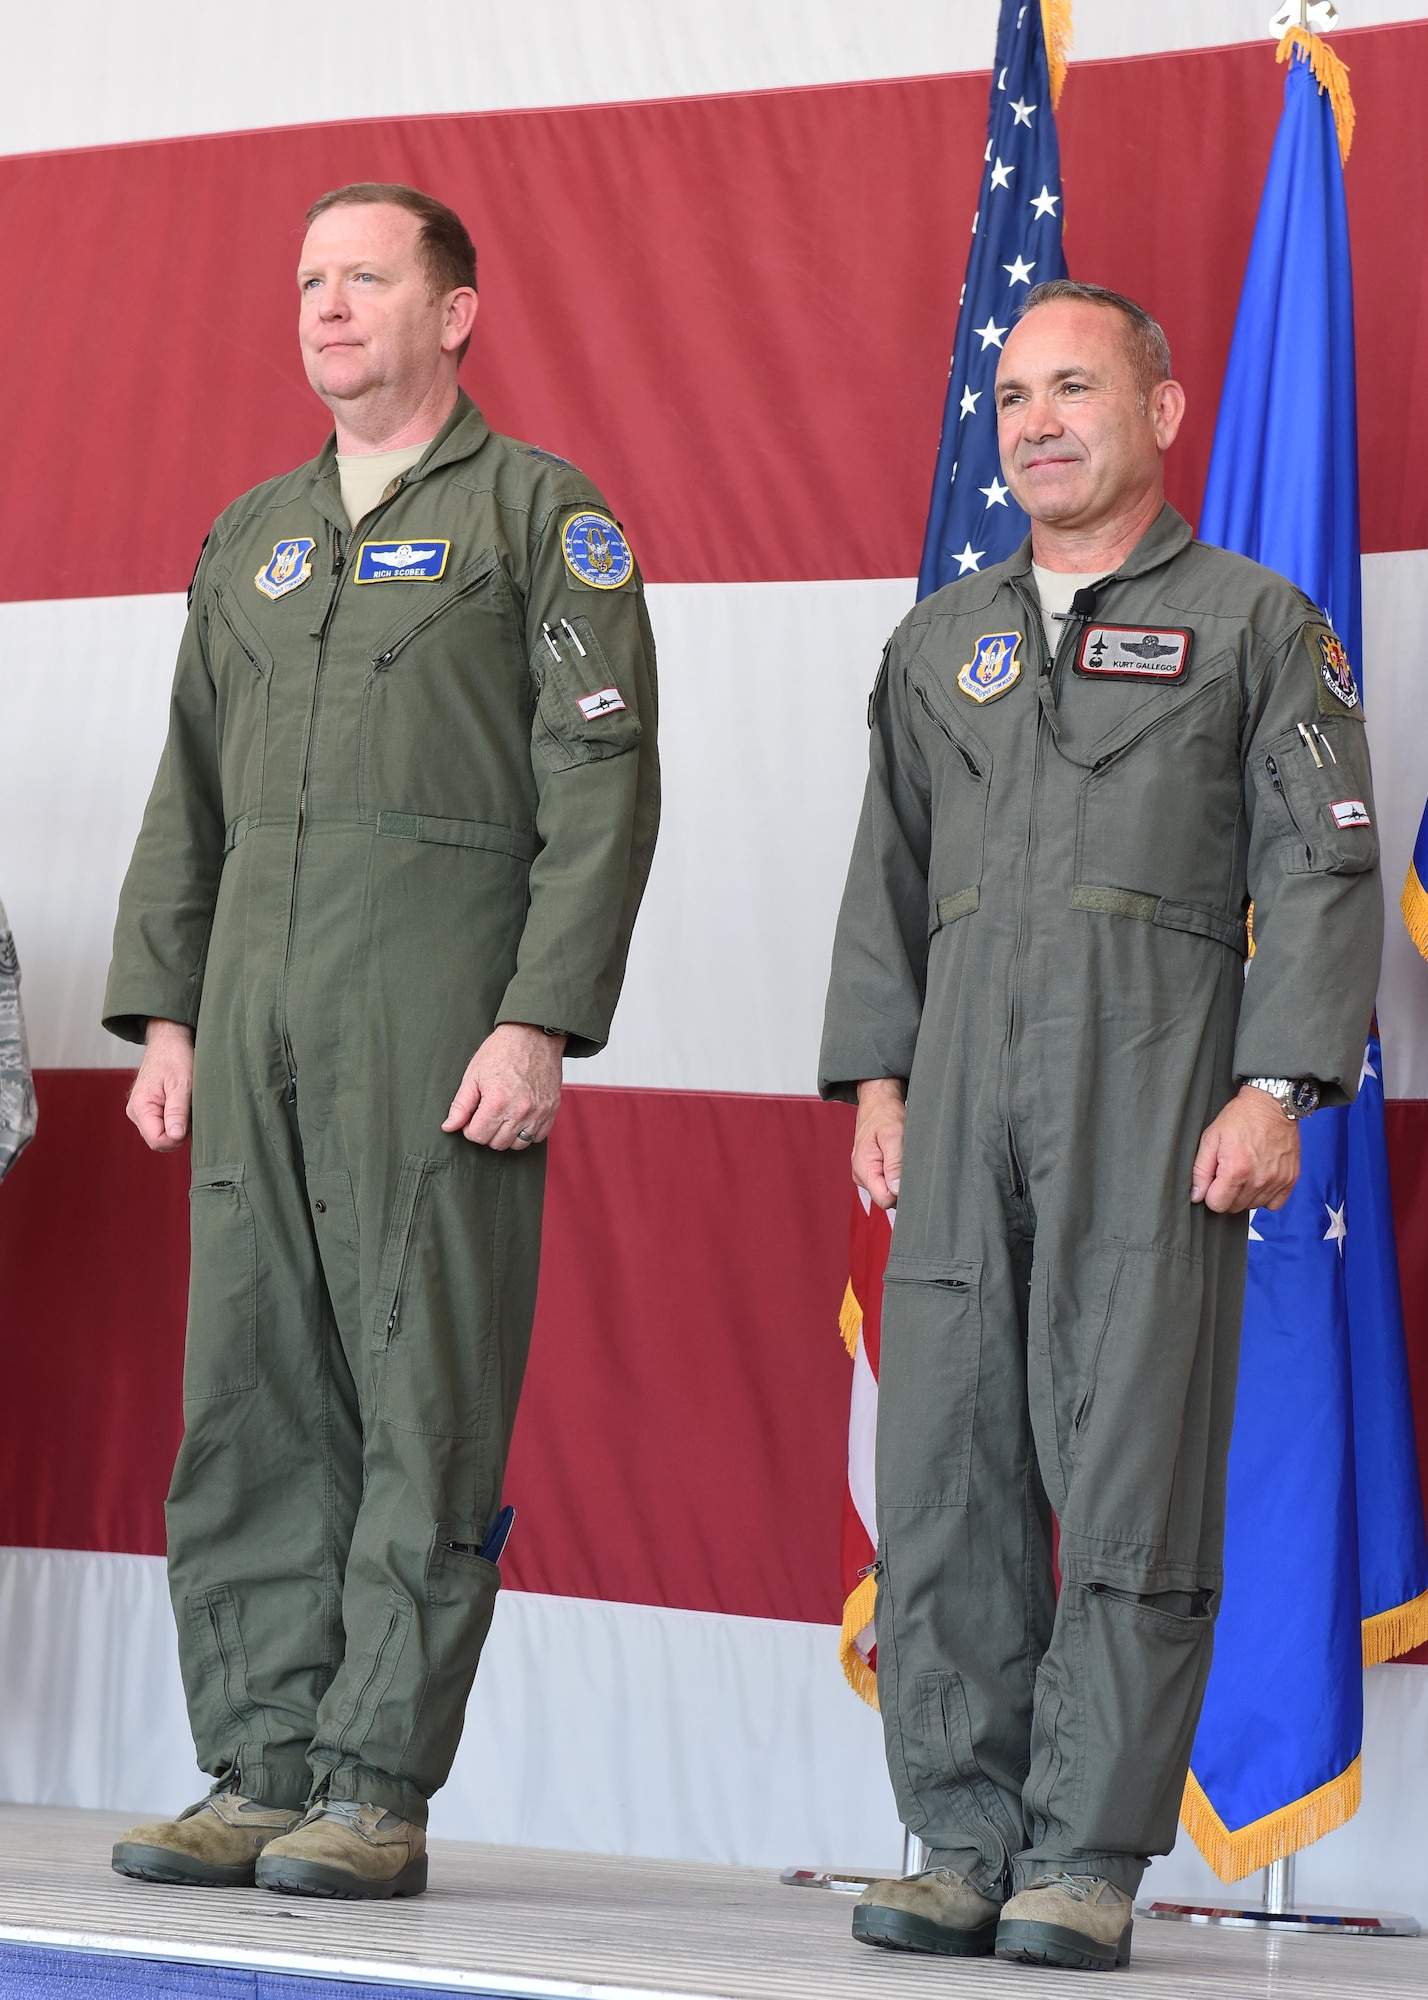 Maj. Gen. Richard Scobee, Air Force Reserve Command vice commander, stands next to Col. Kurt Gallegos, 944th Fighter Wing commander, June 3 during a retirement ceremony at Luke Air Force base, Ariz. (U.S. Air Force photo by Staff Sgt. Lausanne Kinder)